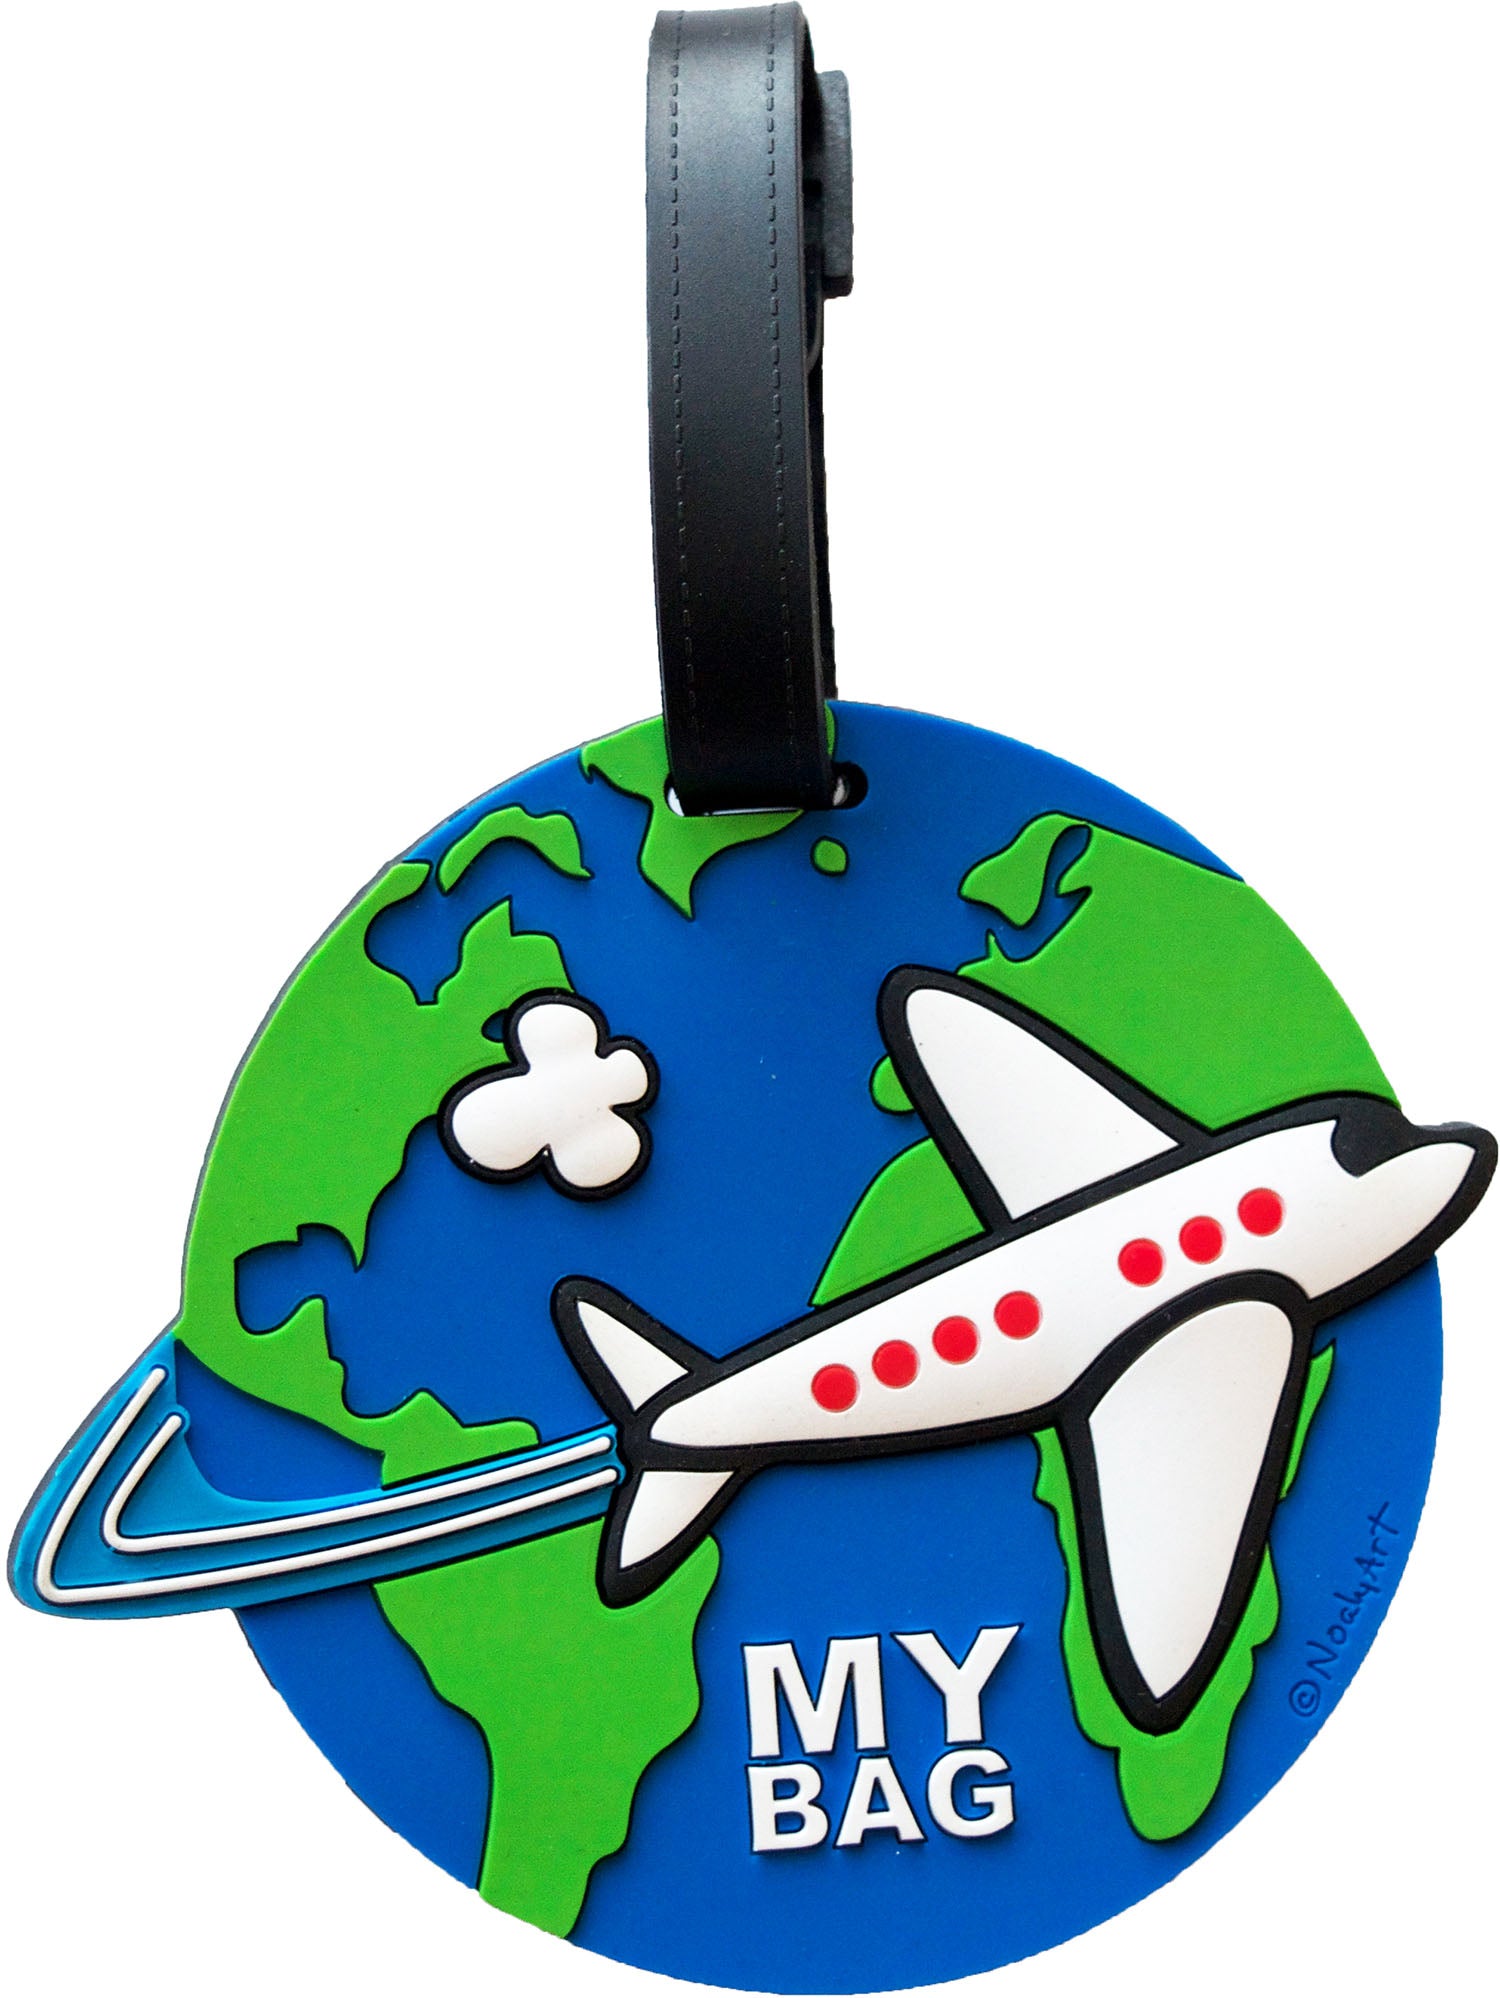 Fifth Avenue 3 D Airplane Luggage Tag